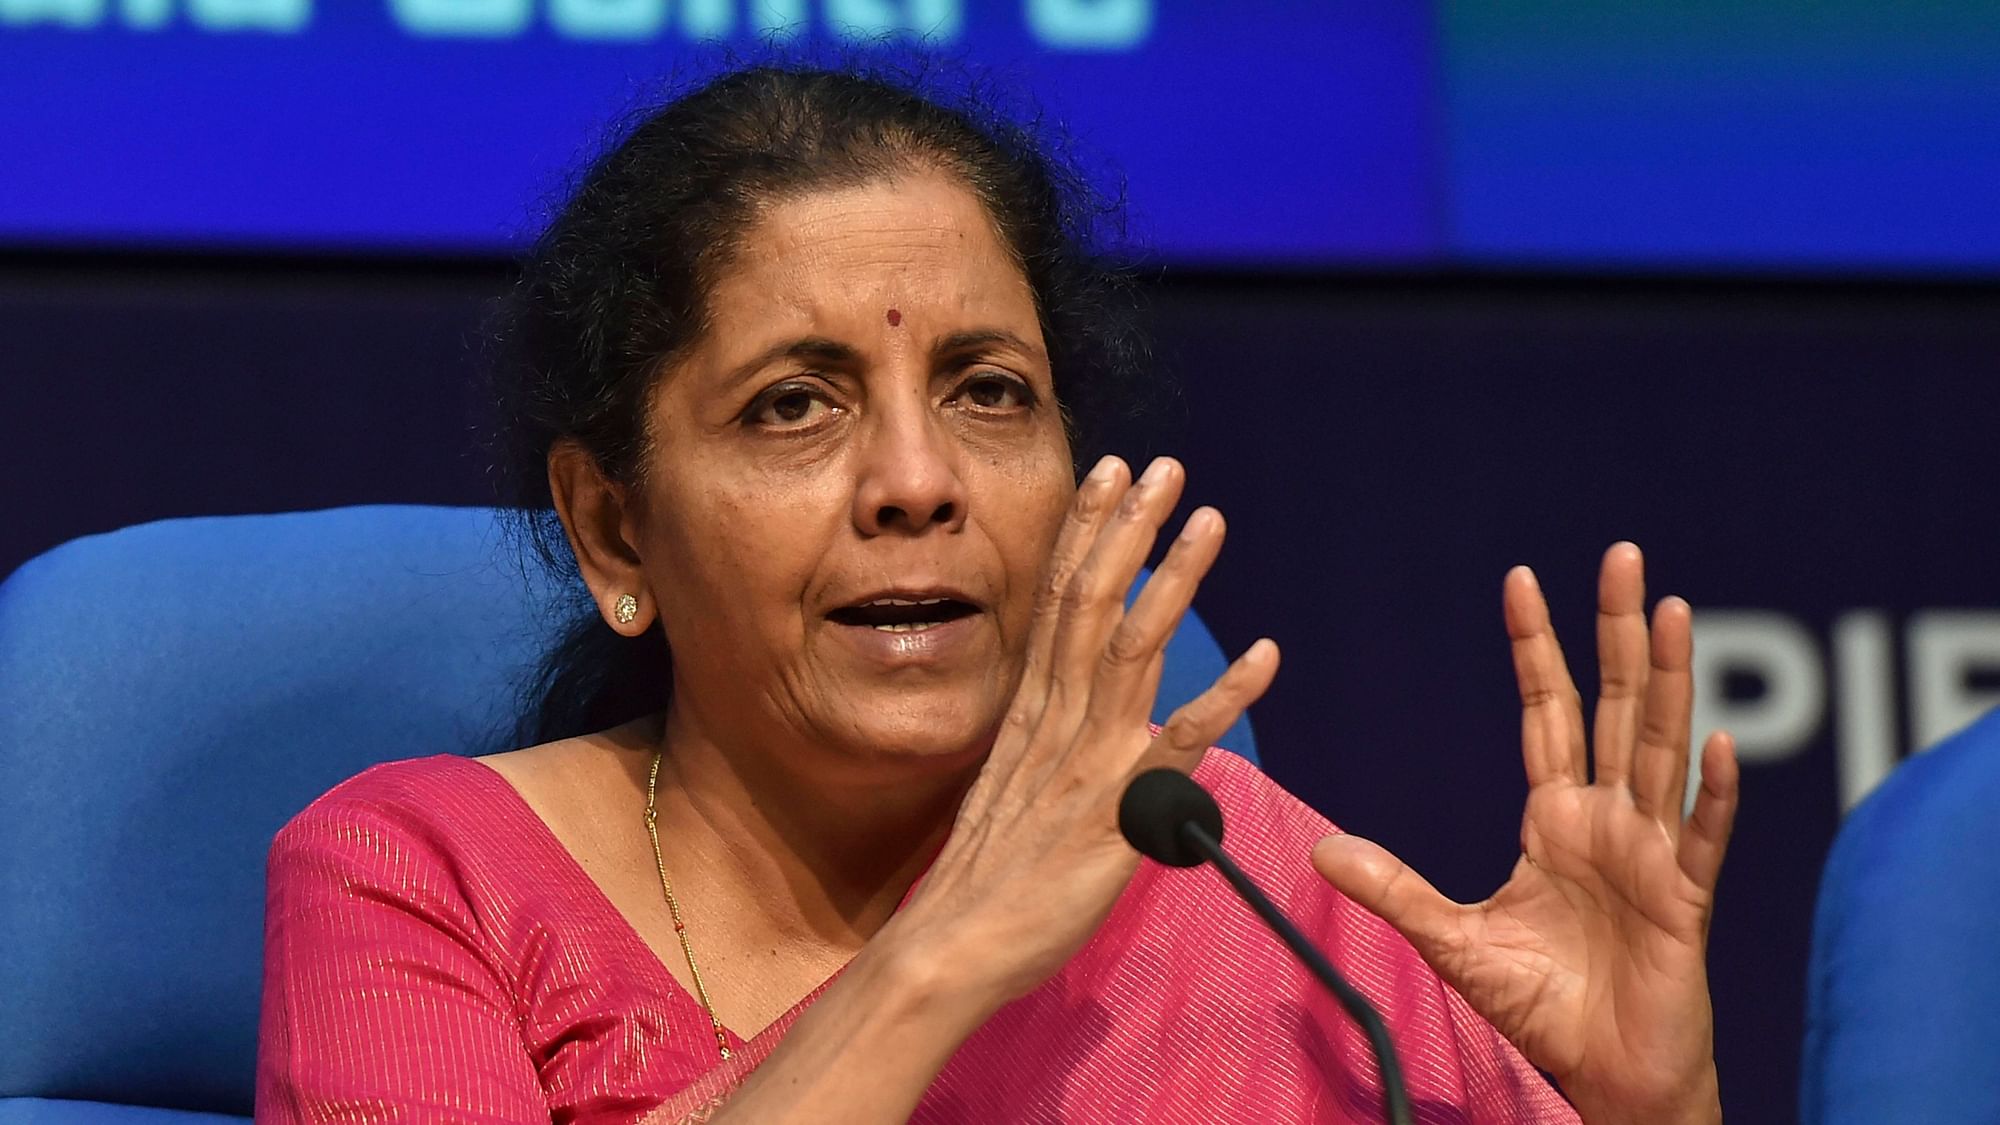 Sitharaman said that it was a serious and important issue and both the central and state governments should talk to provide fuel at the “appropriate level to consumers”.